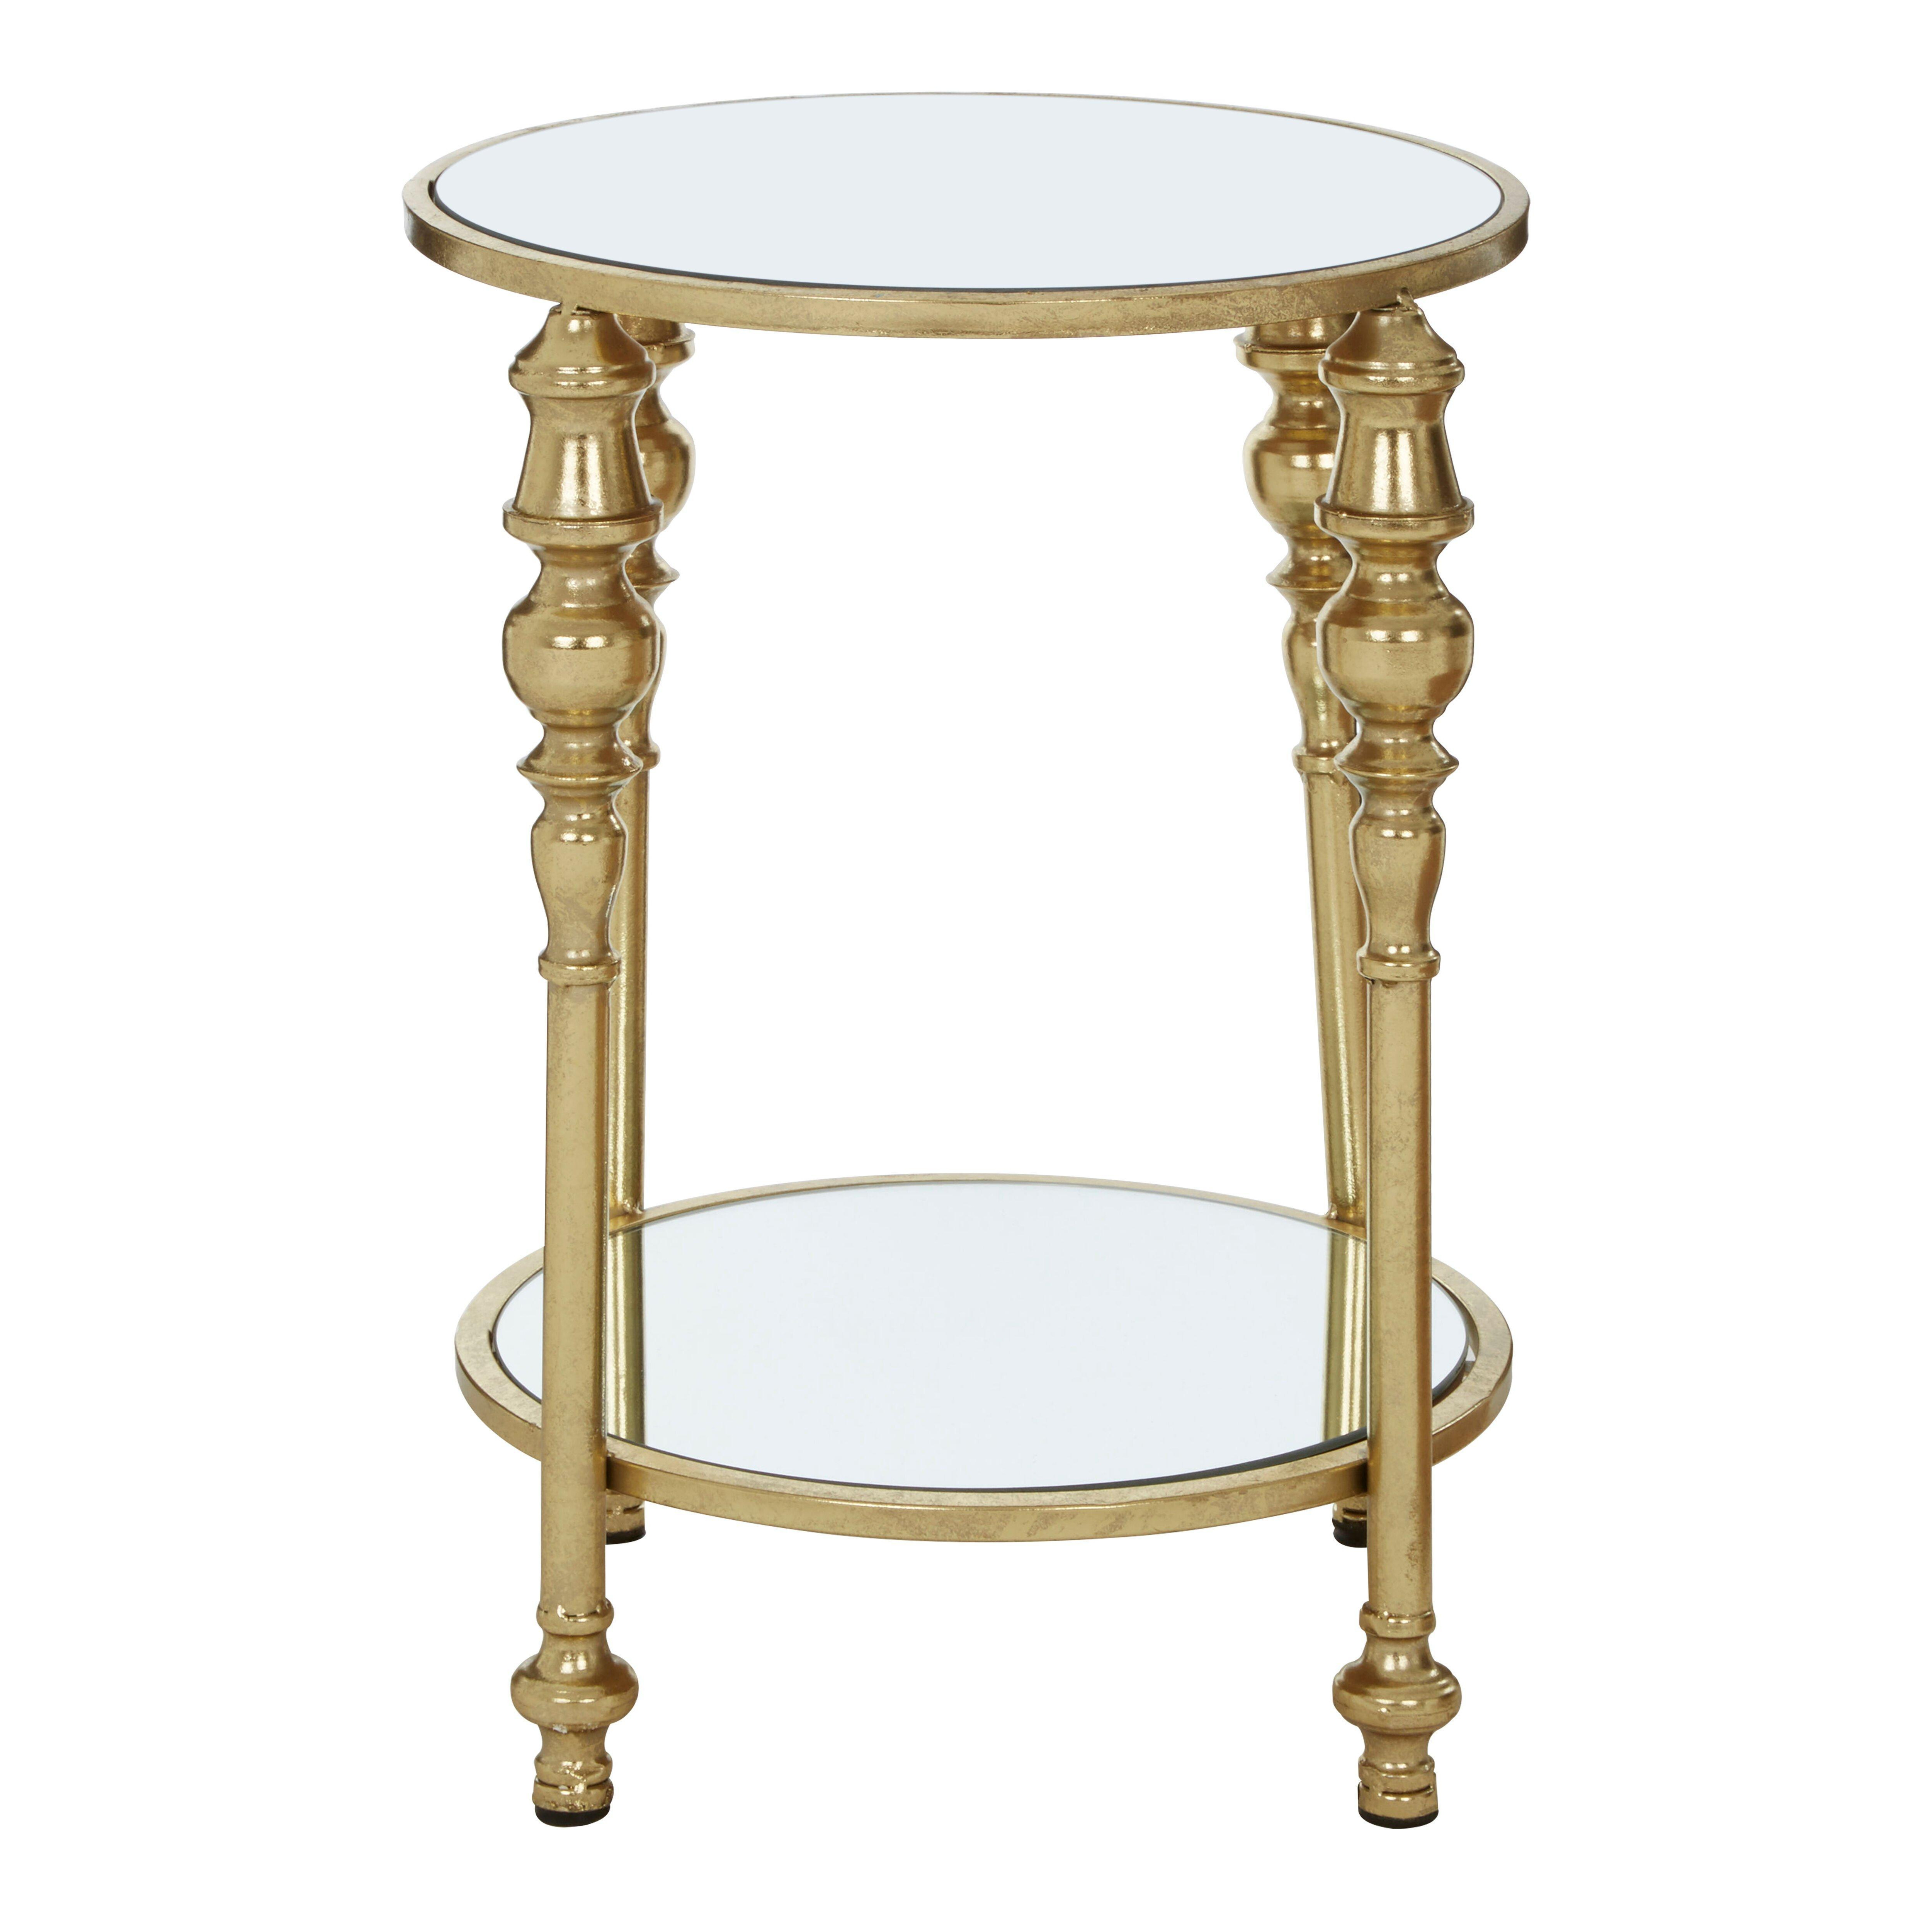 Marcia 2 Tier Gold Finish Side Table - image 1